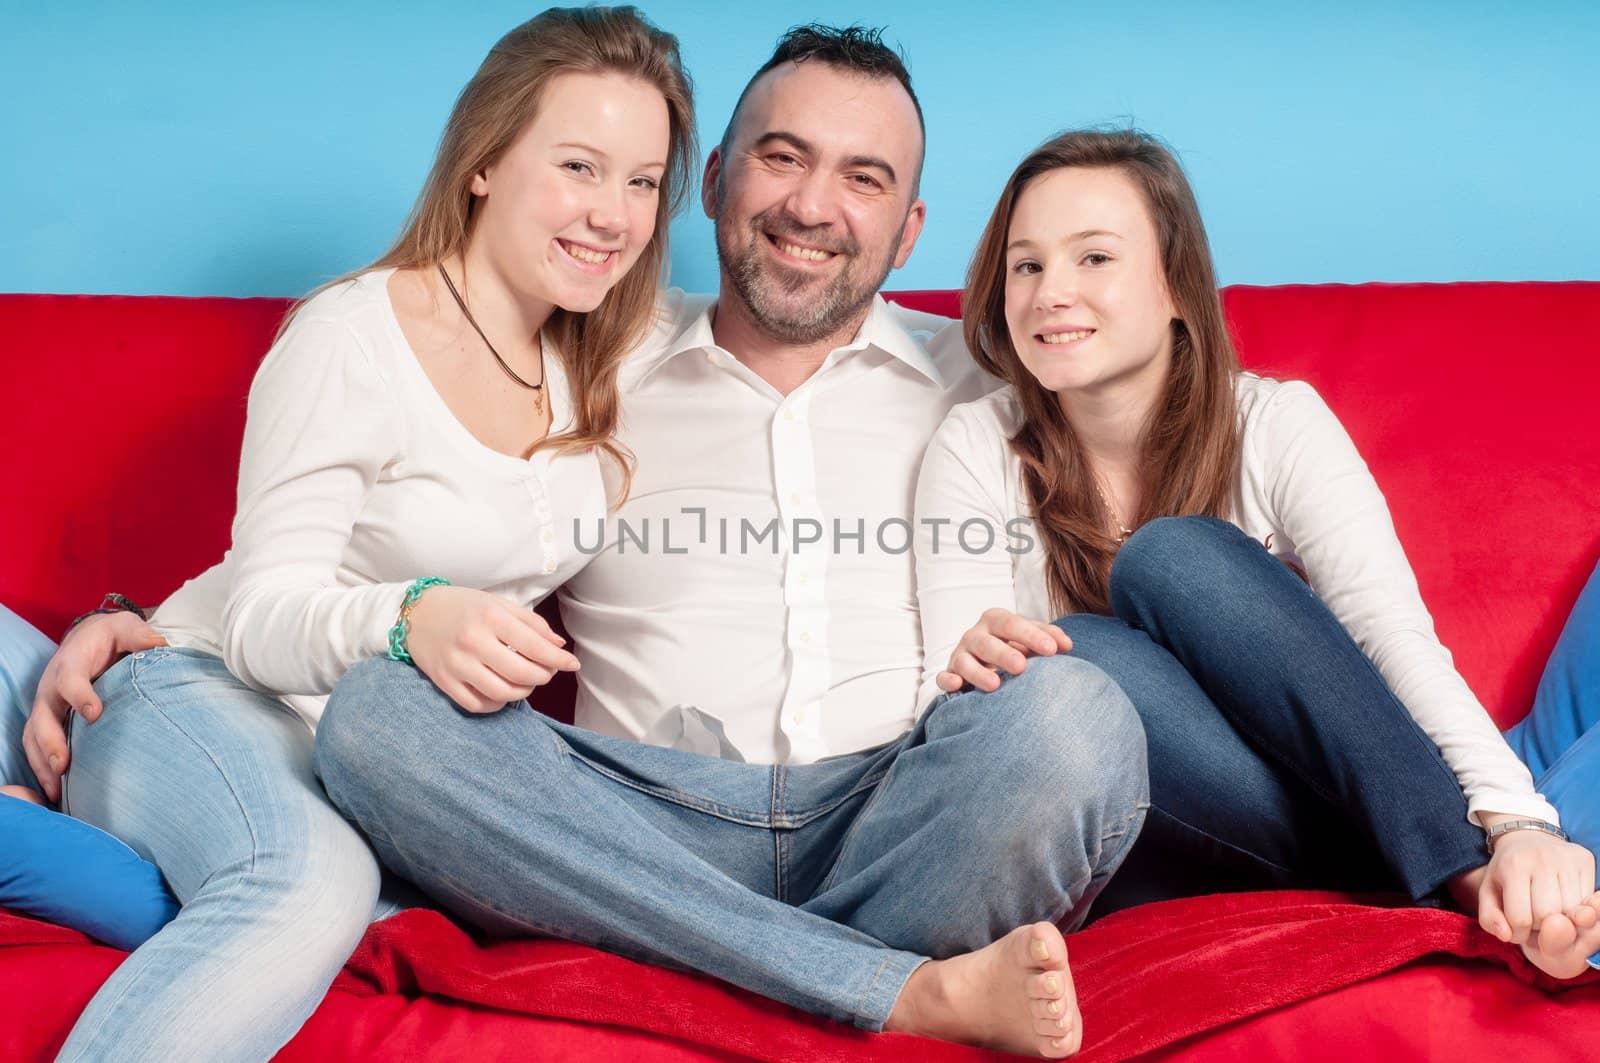 happy father and daughters on the couch in the living room